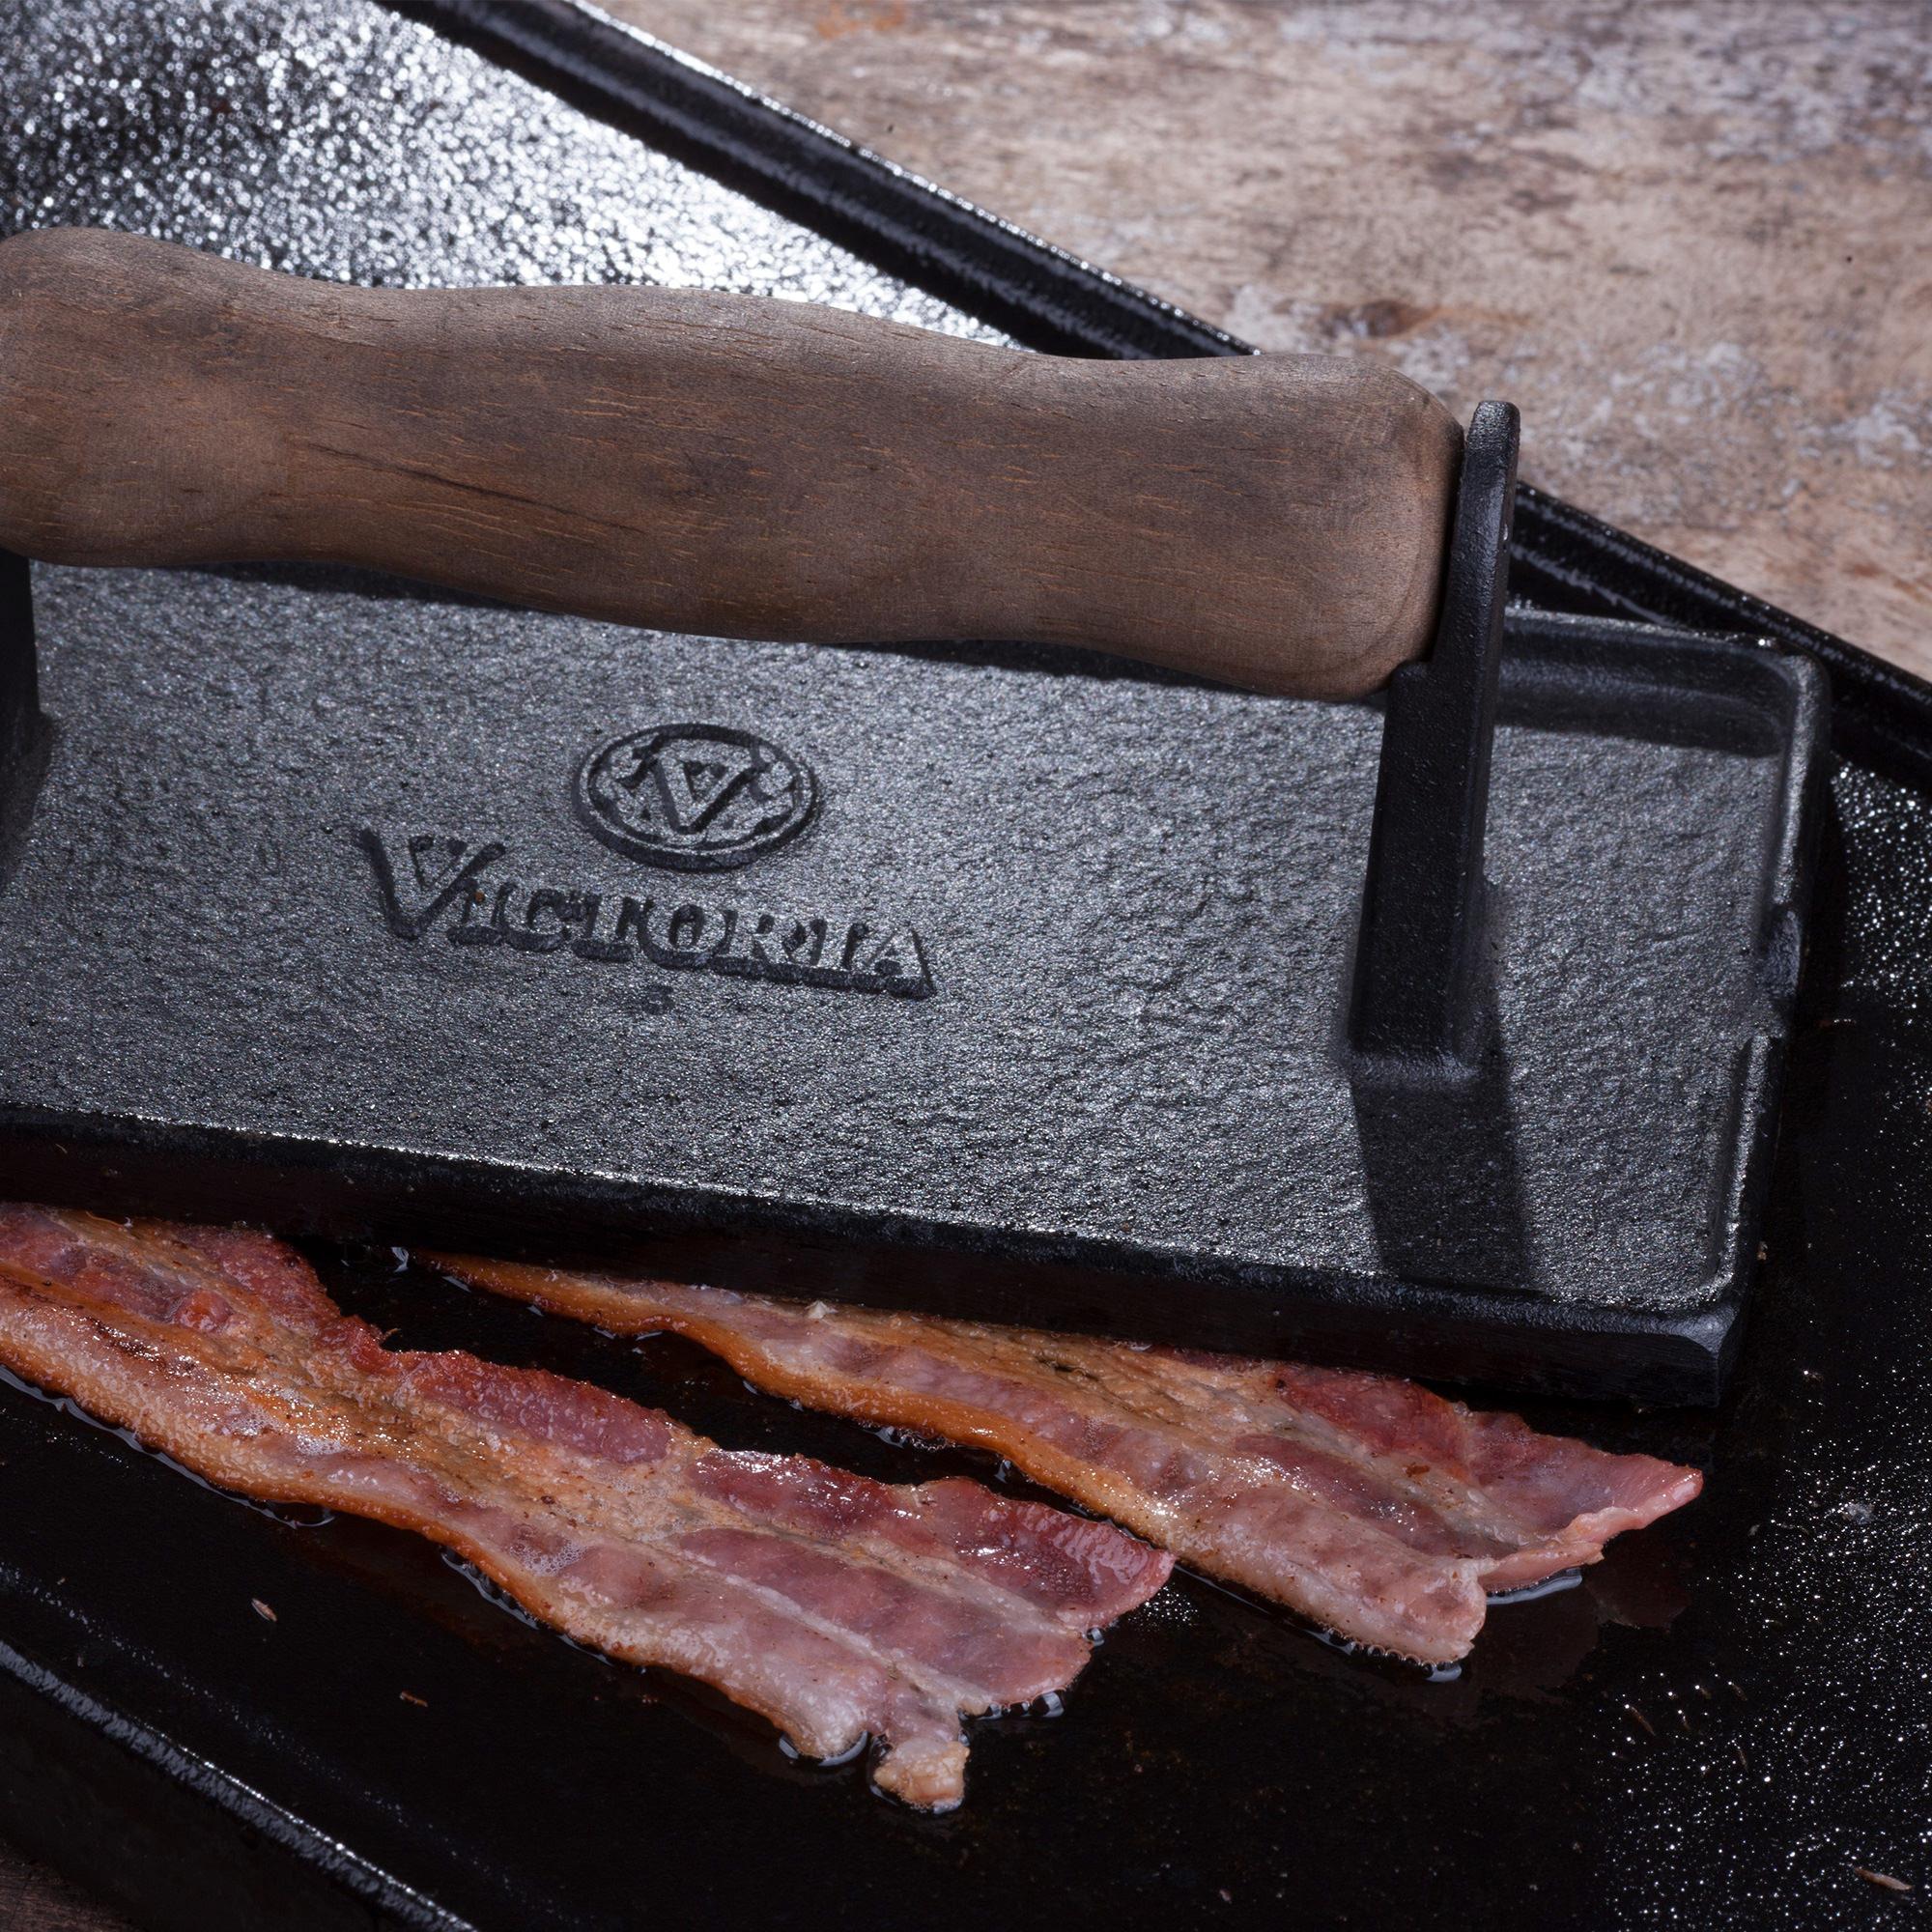 Victoria Seasoned Cast Iron Reversible Grill w/ Removable Handles 31.5x19cm Image 6